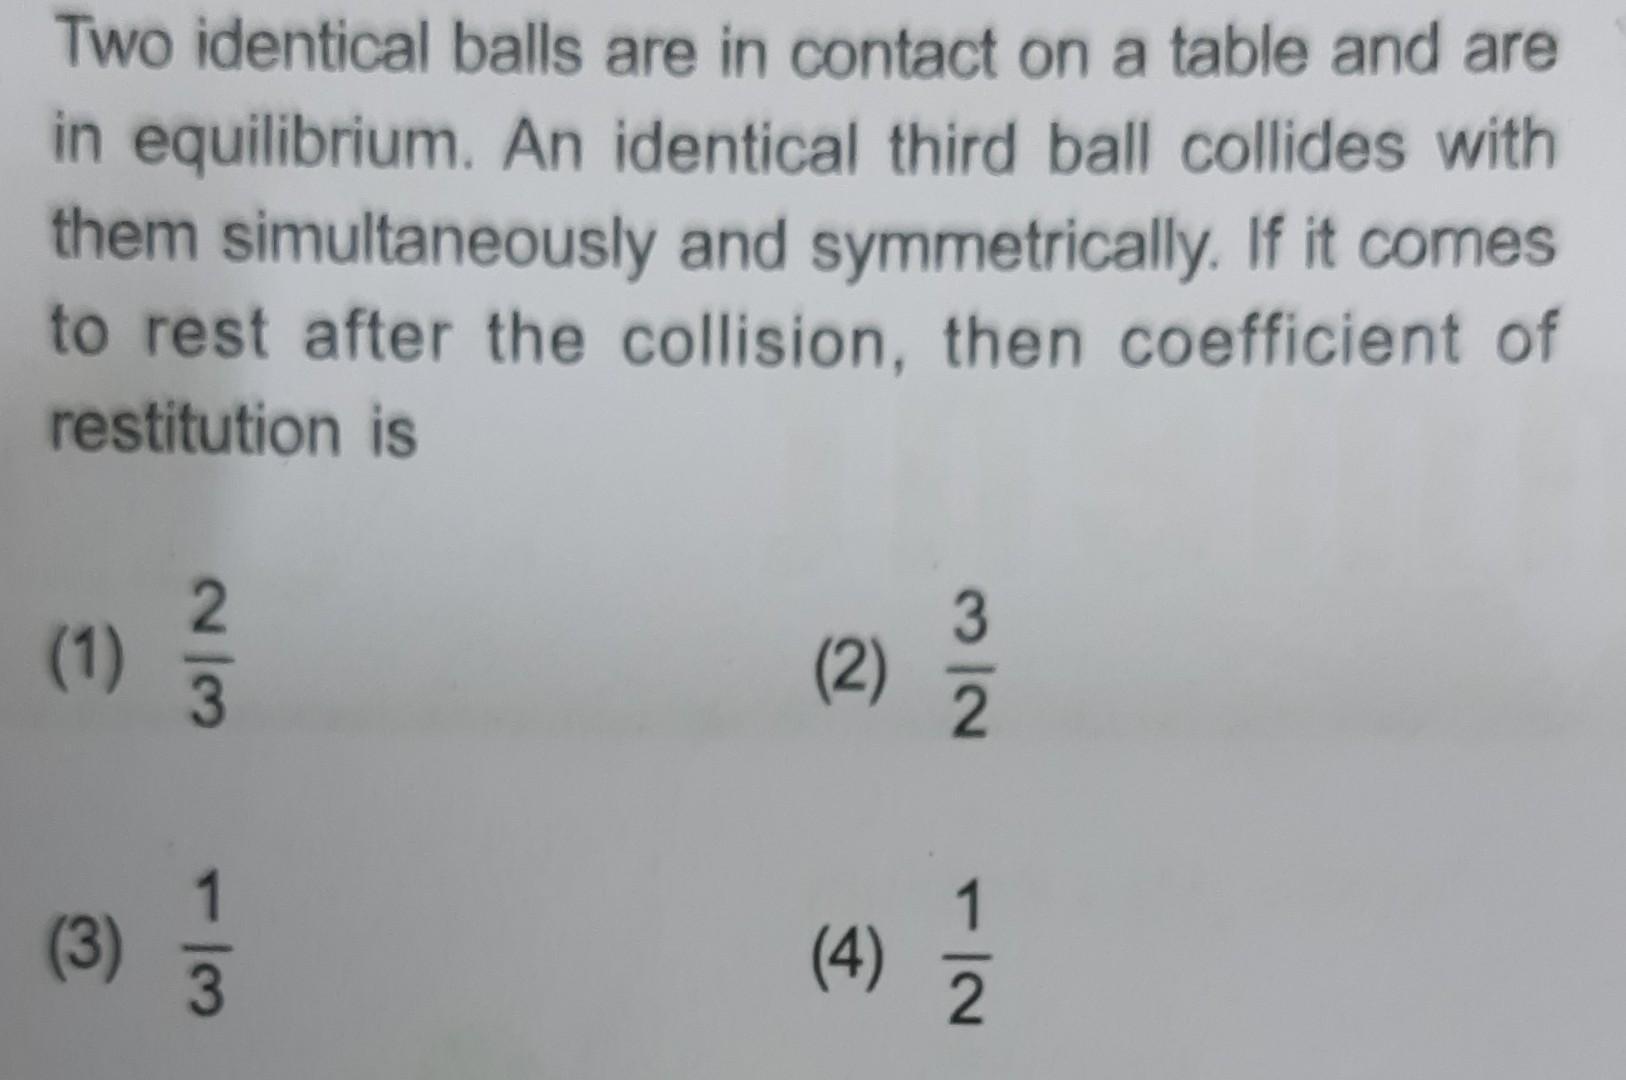 Two identical balls are in contact on a table and are in equilibrium. An identical third ball collides with them simultaneous